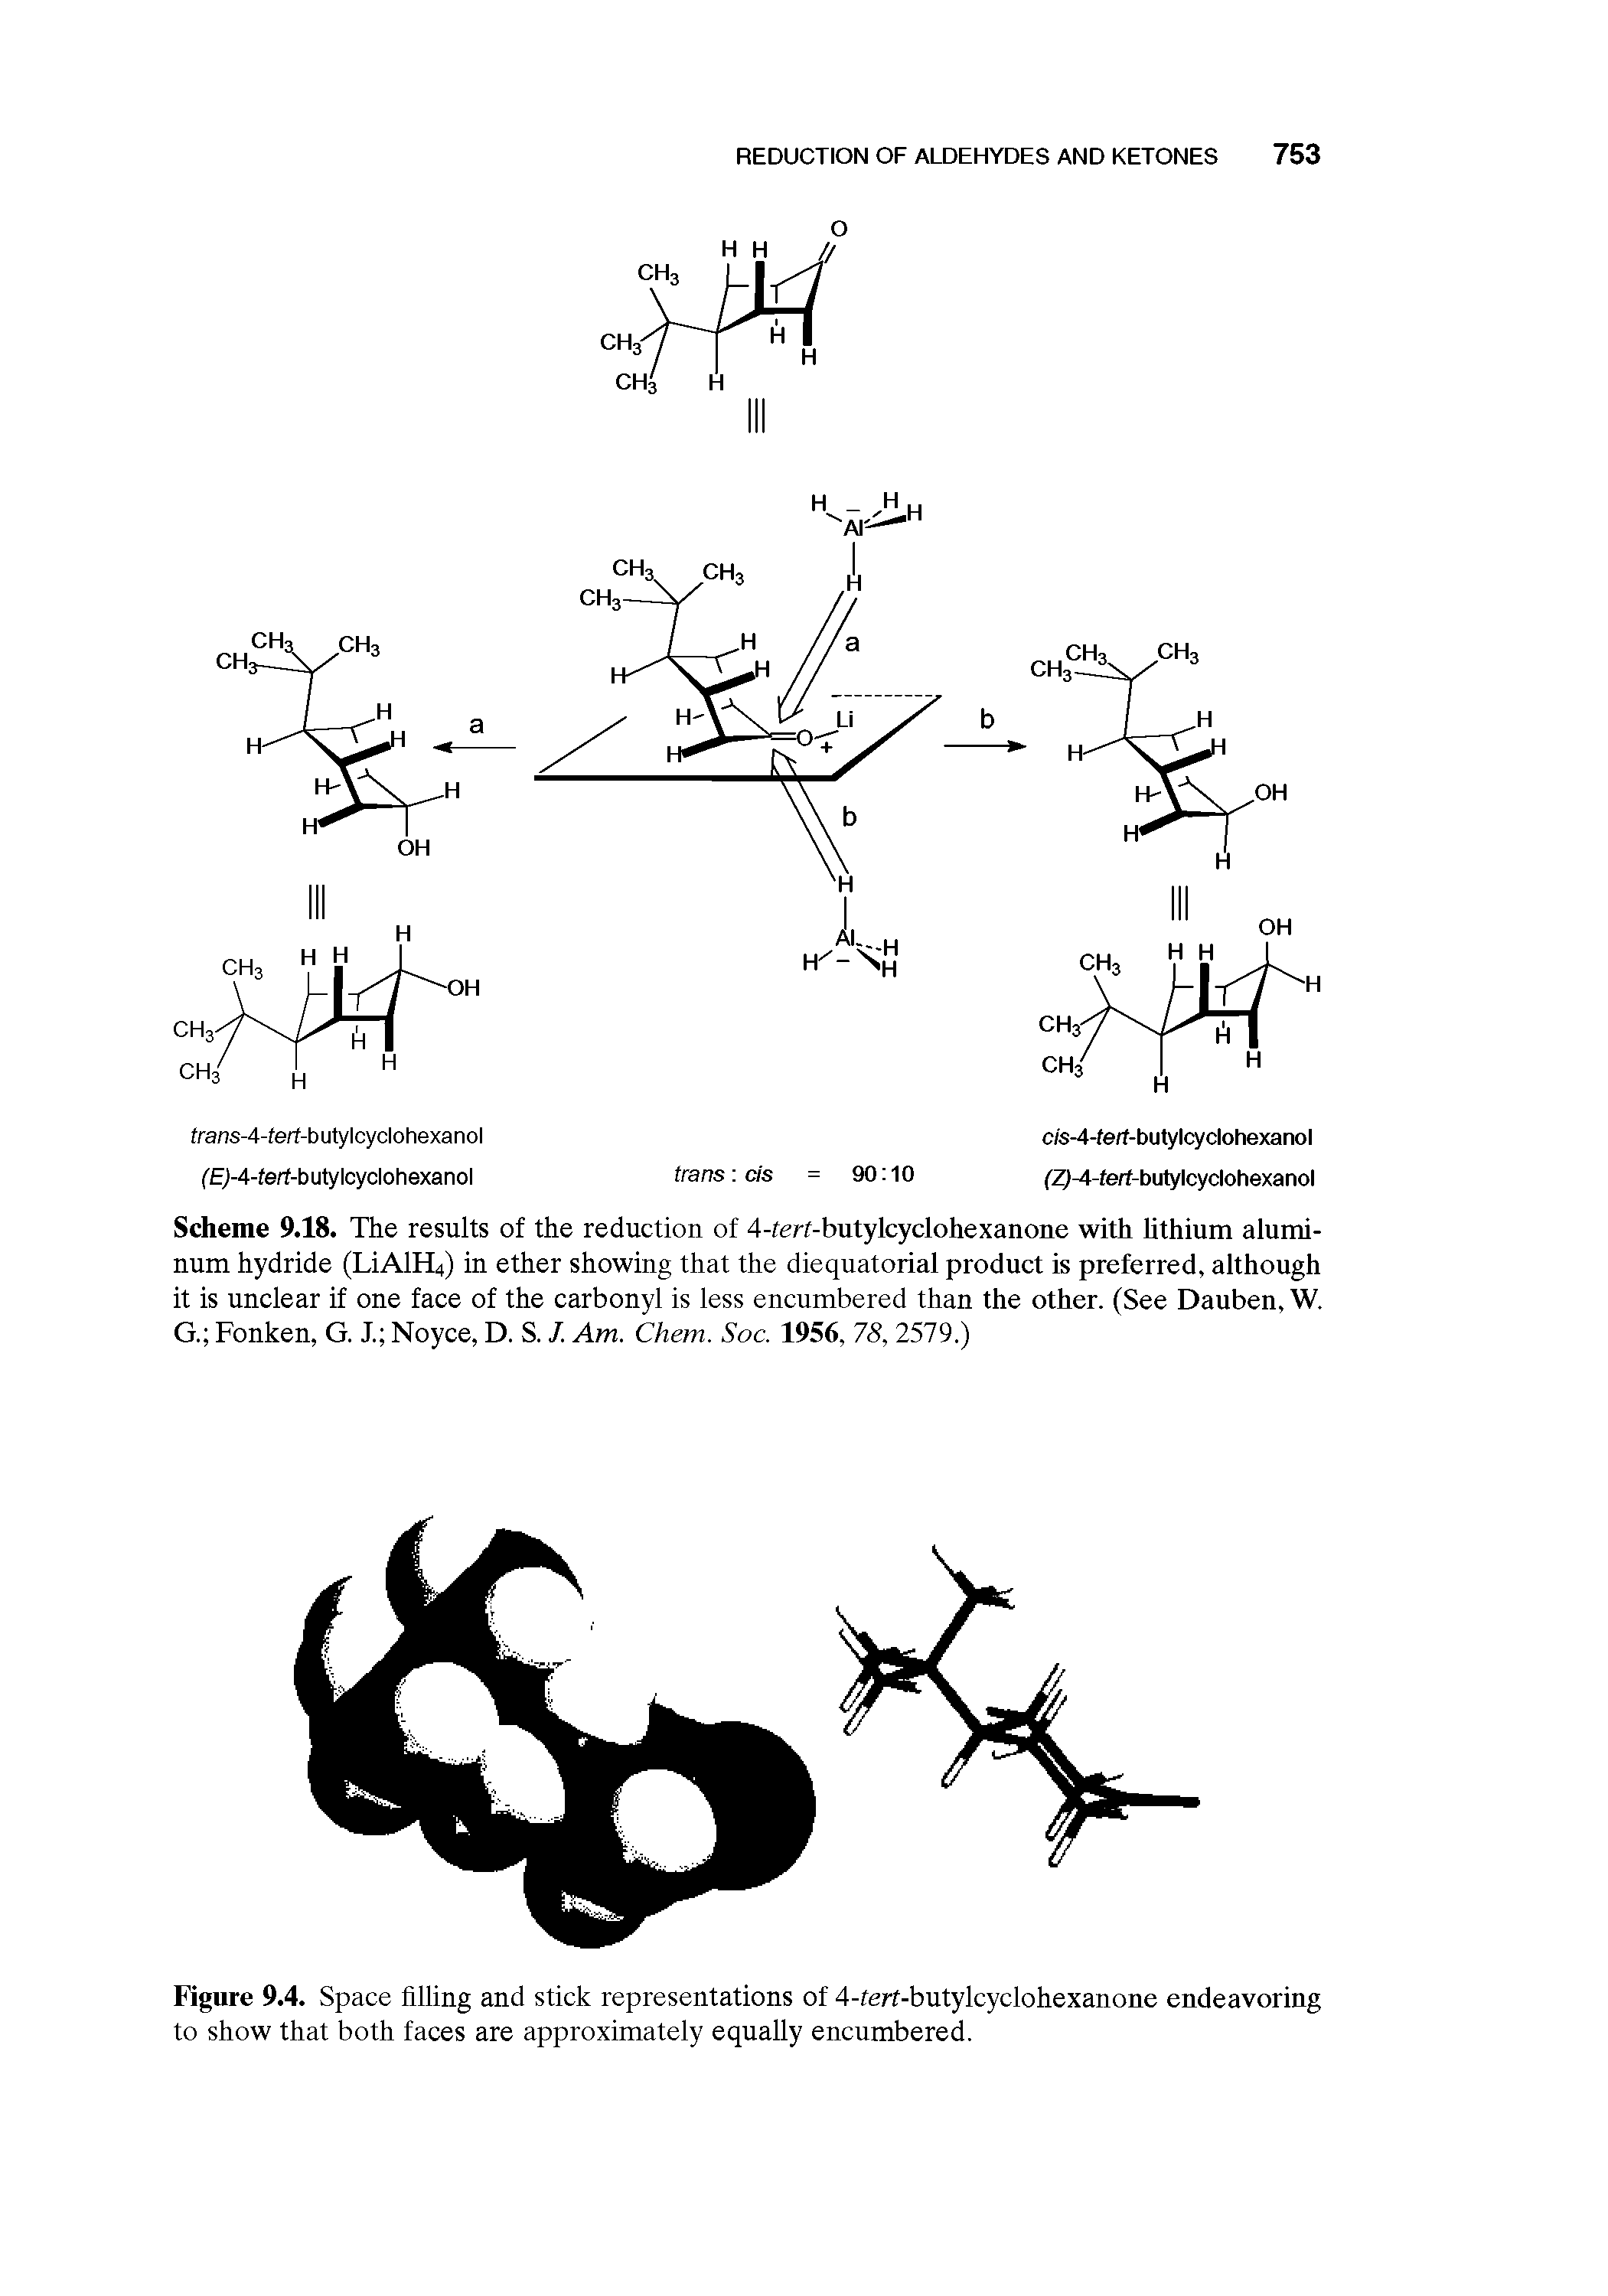 Figure 9.4. Space filling and stick representations of 4-ferf-butylcyclohexanone endeavoring to show that both faces are approximately equally encumbered.